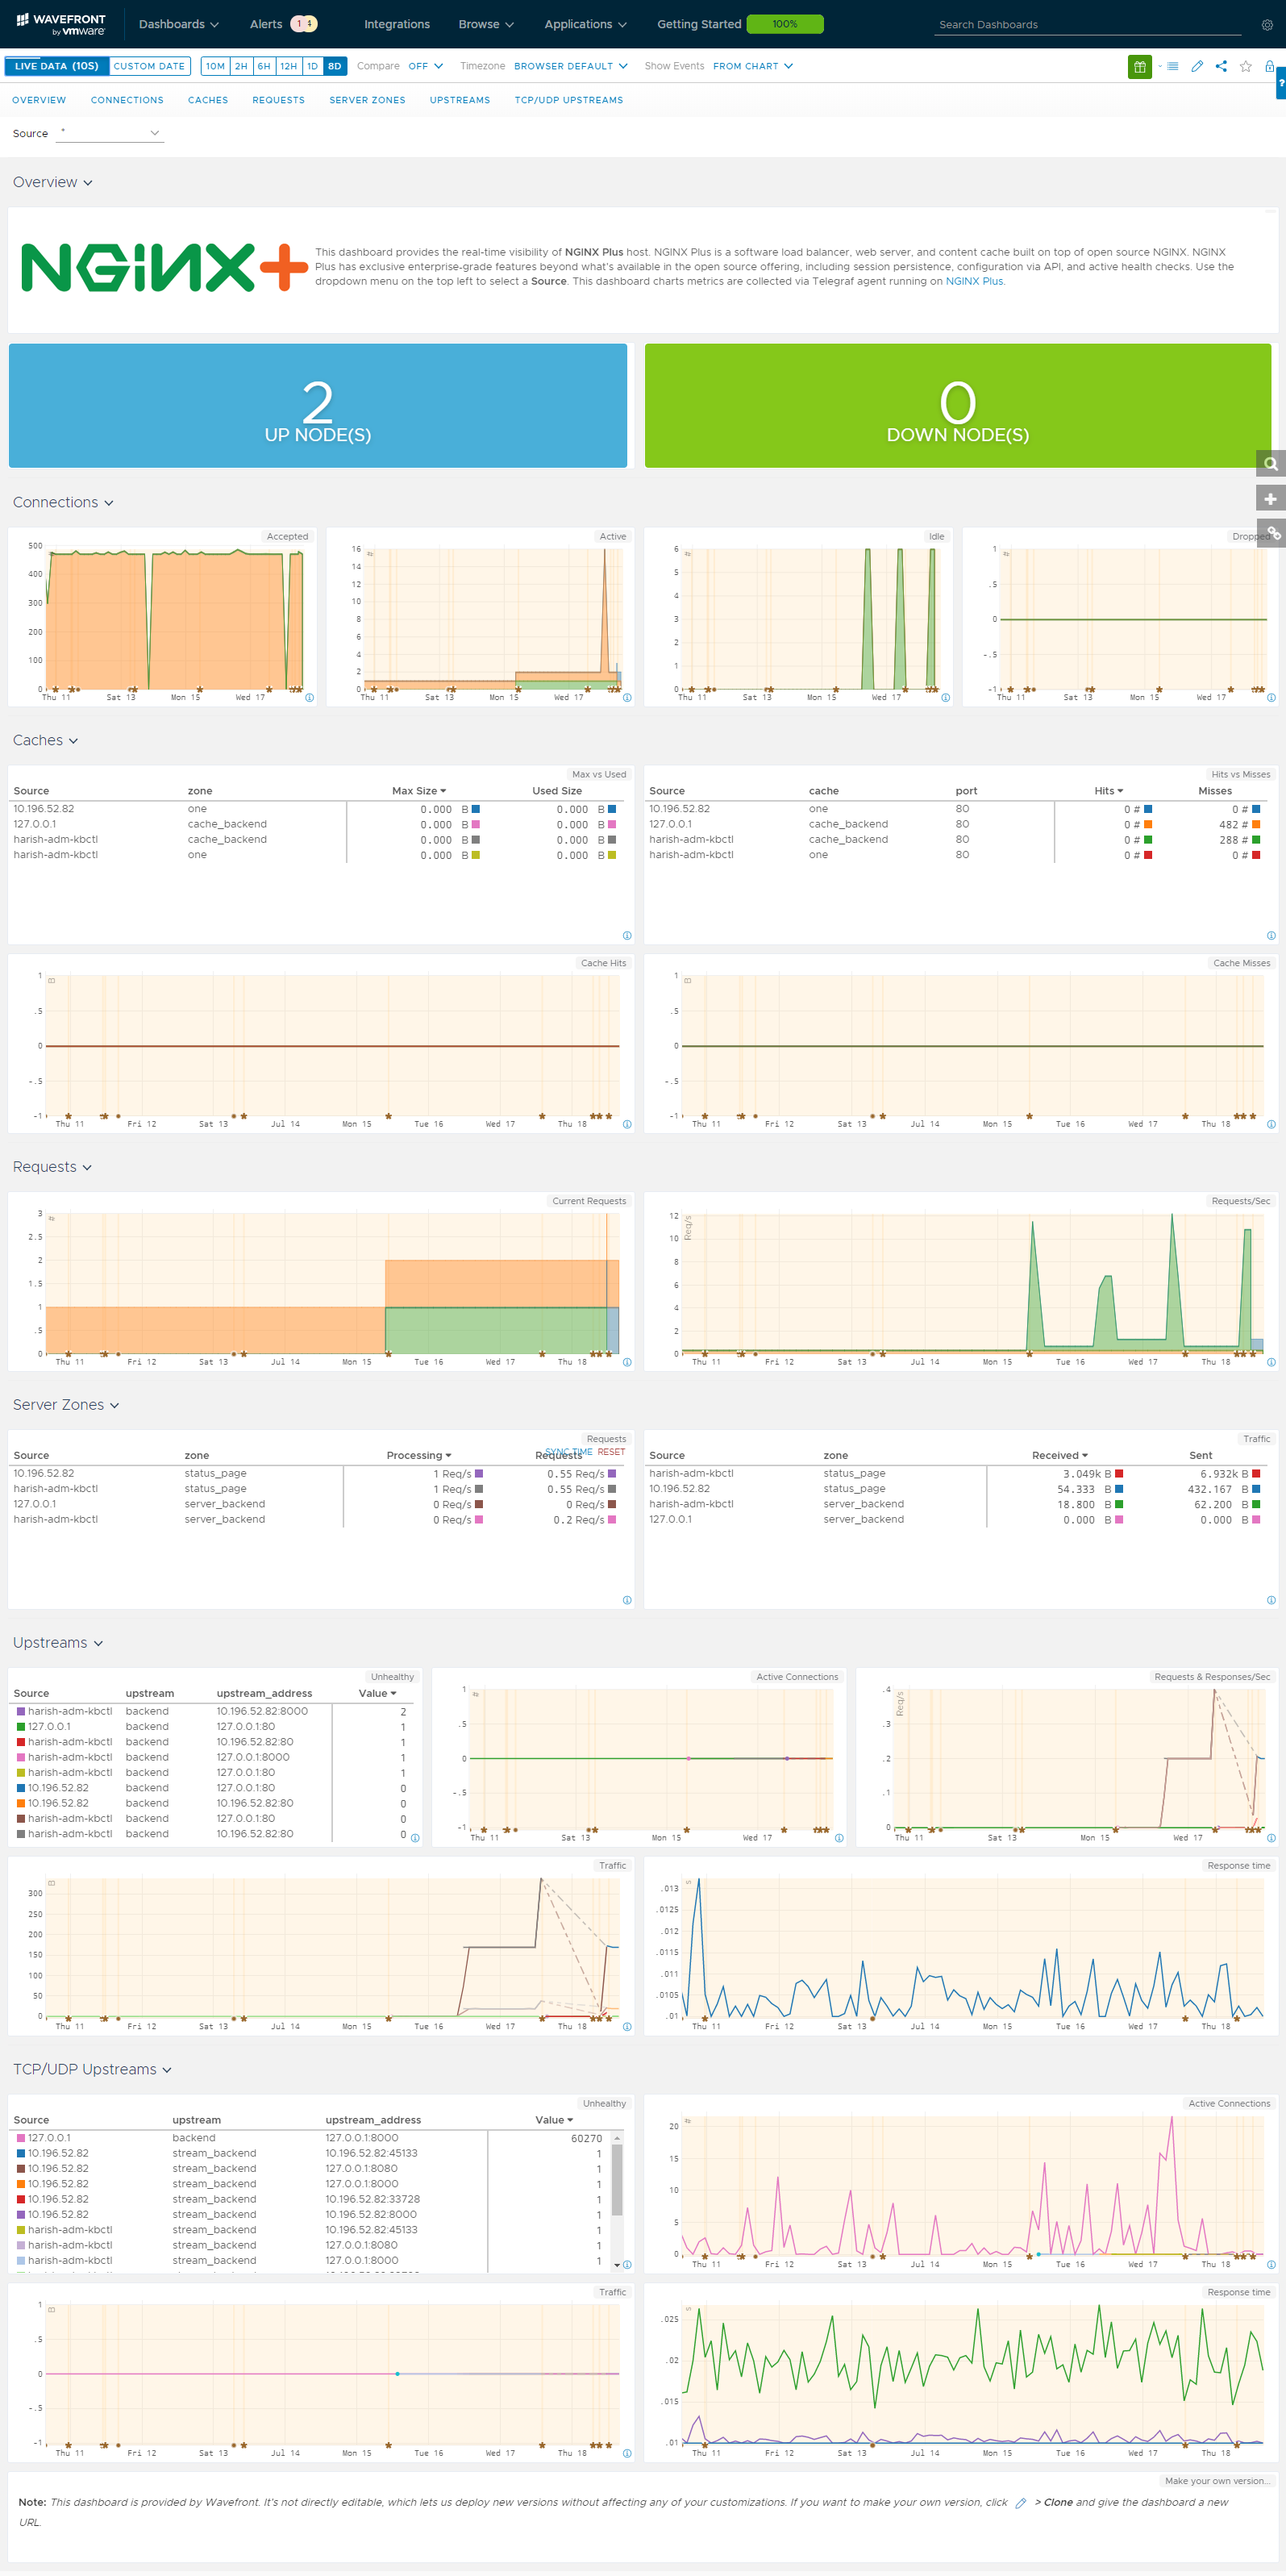 images/nginxp_dashboard.png